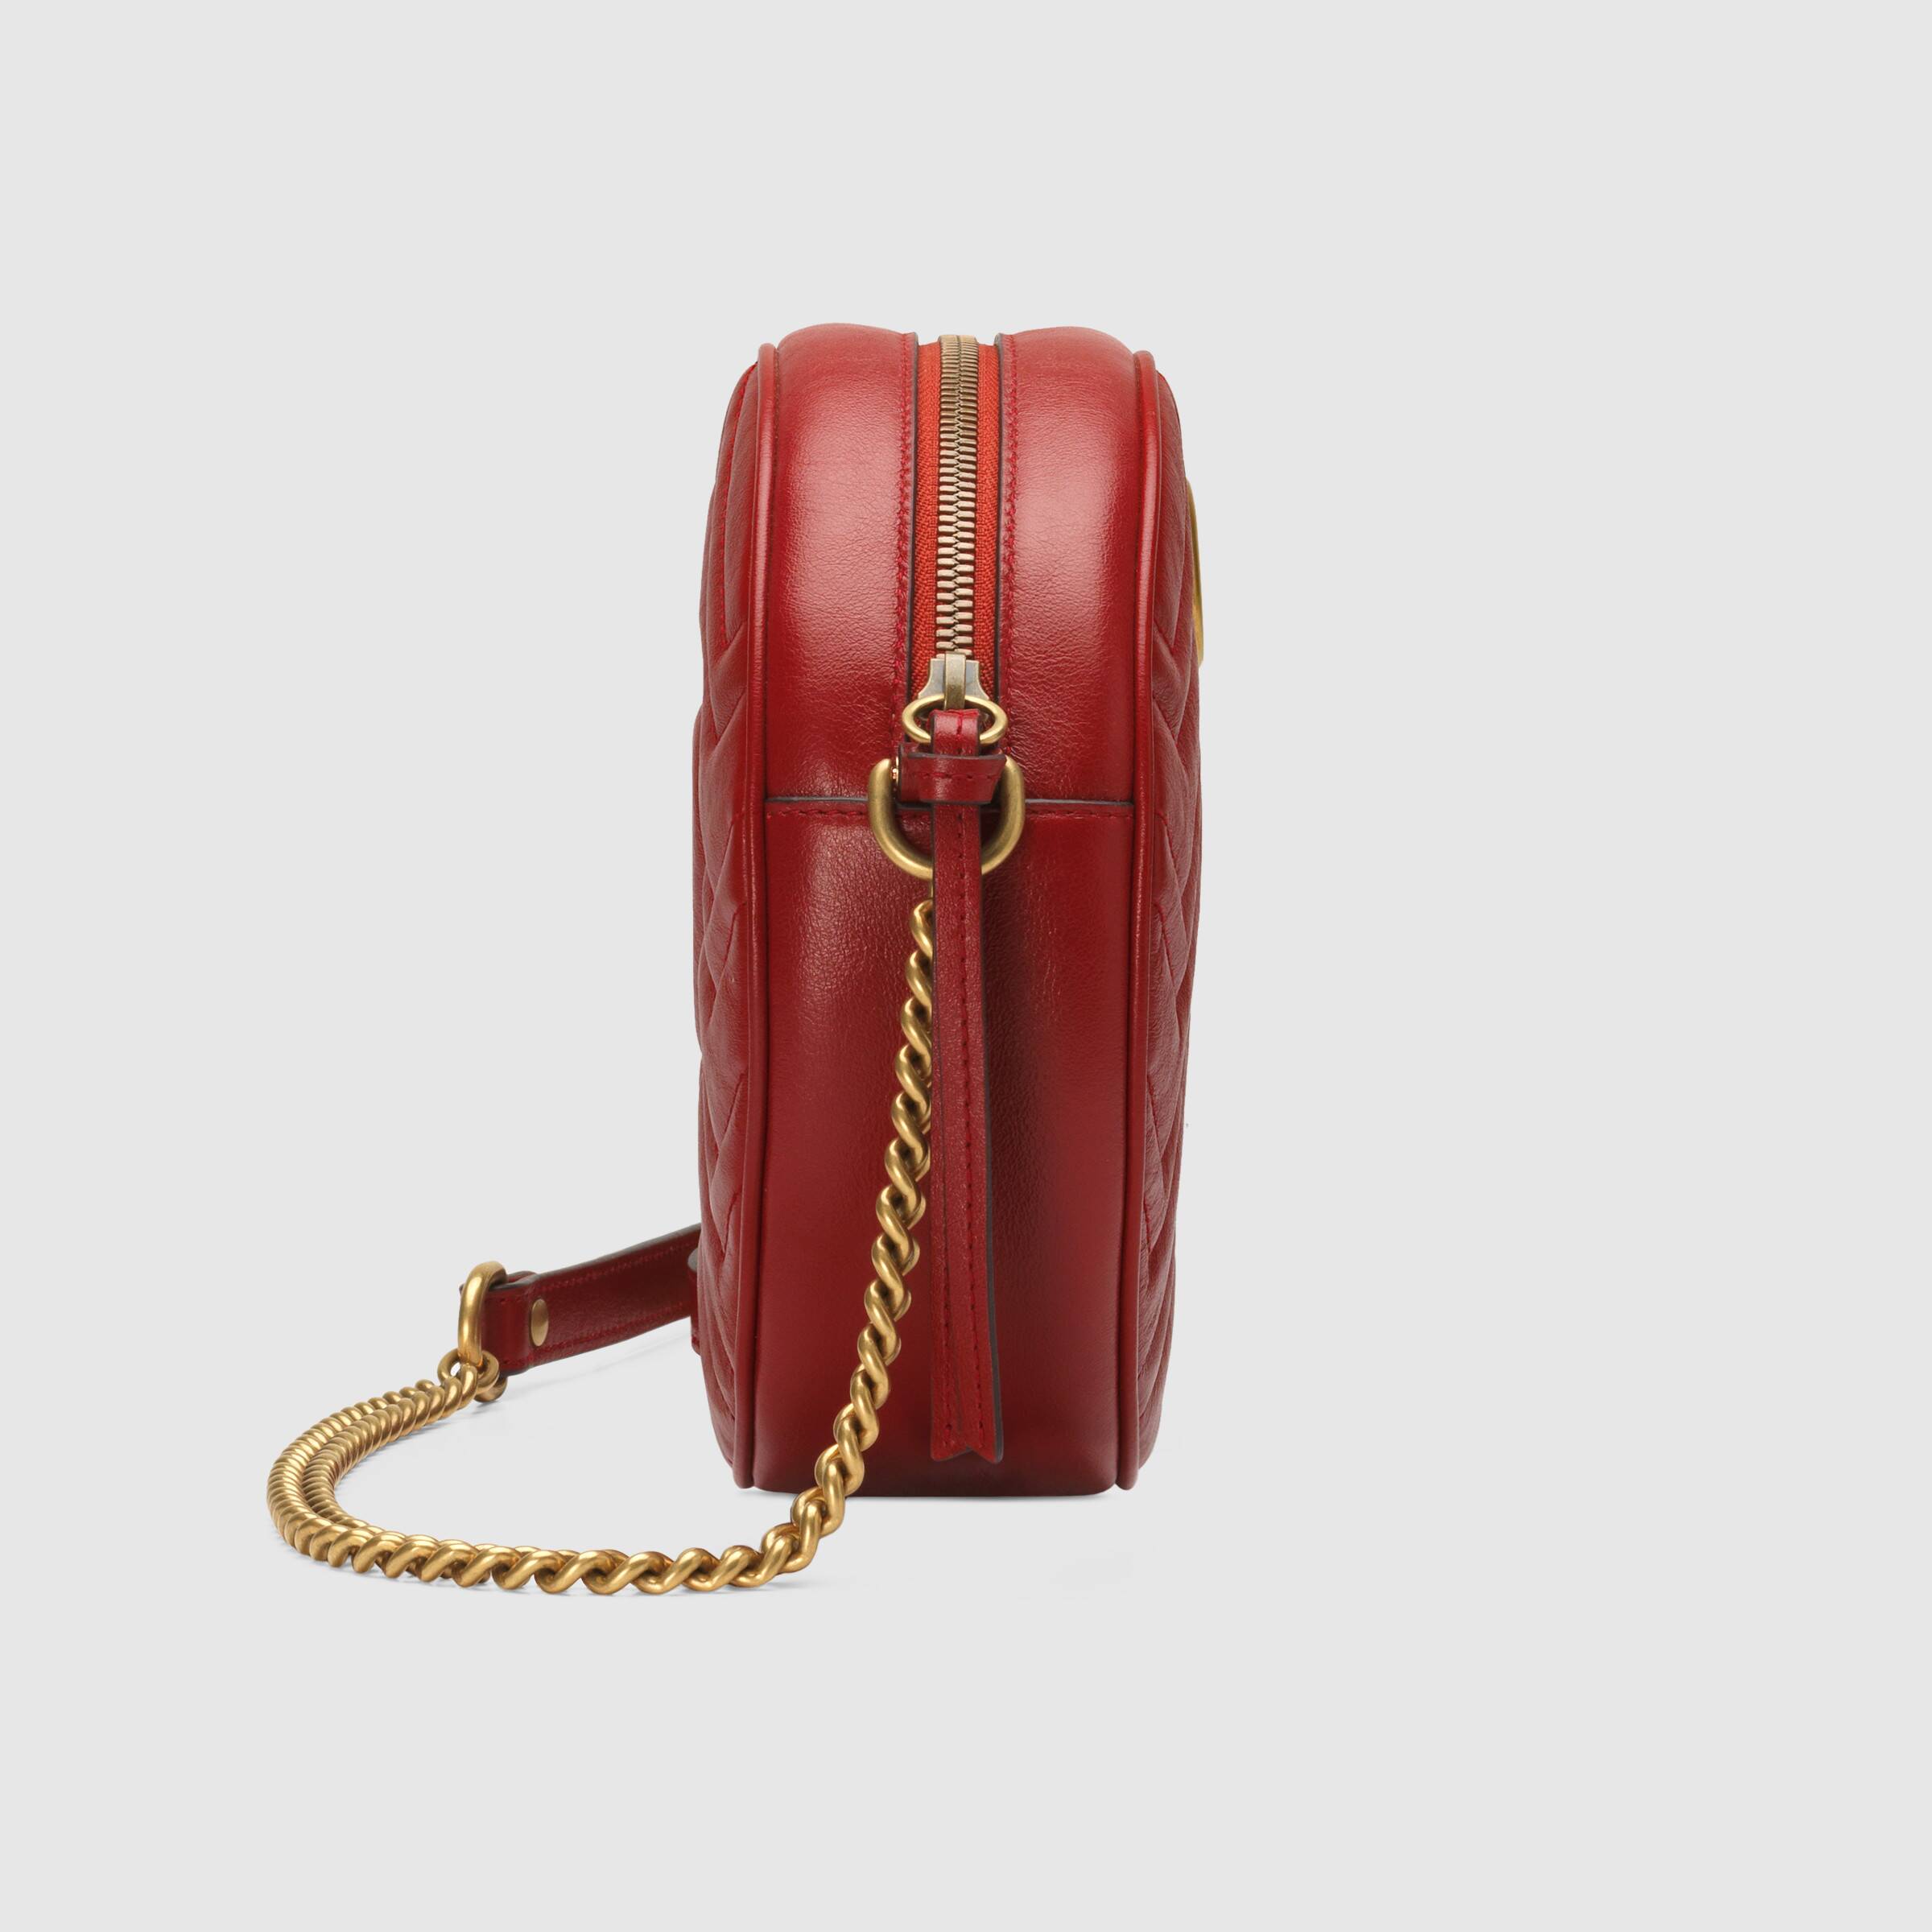 Gucci GG Marmont Mini Round Shoulder Bag Hibiscus Red